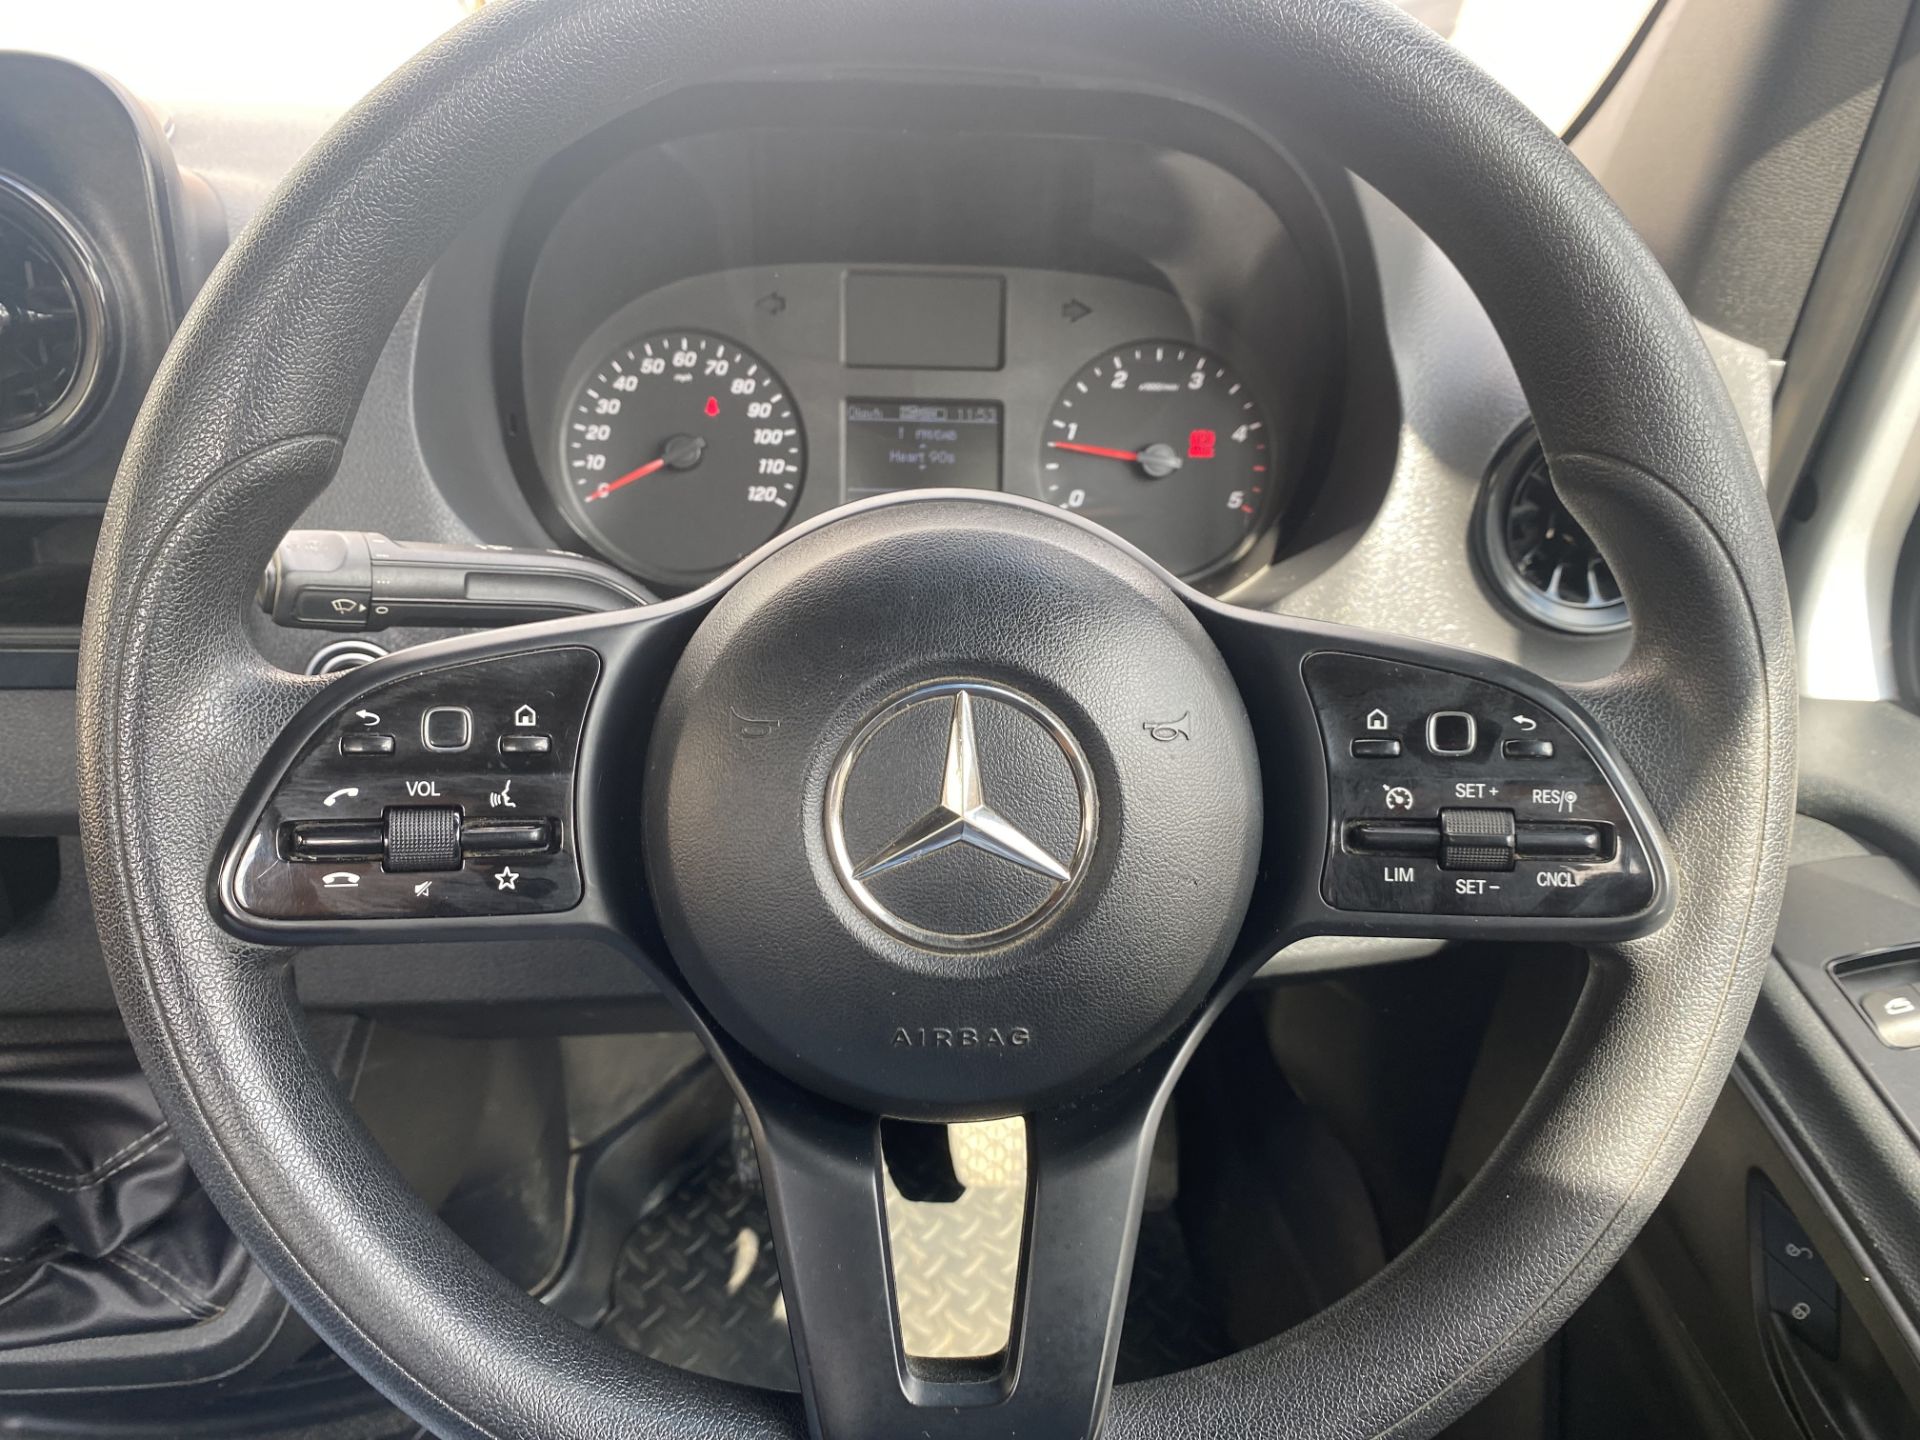 2018 MERCEDES BENZ SPRINTER 316 2.1 CDI L3 DIESEL RWD 3.5T CHASSIS CAB ALUMINIUM FLAT EXTRA LONG - Image 21 of 25